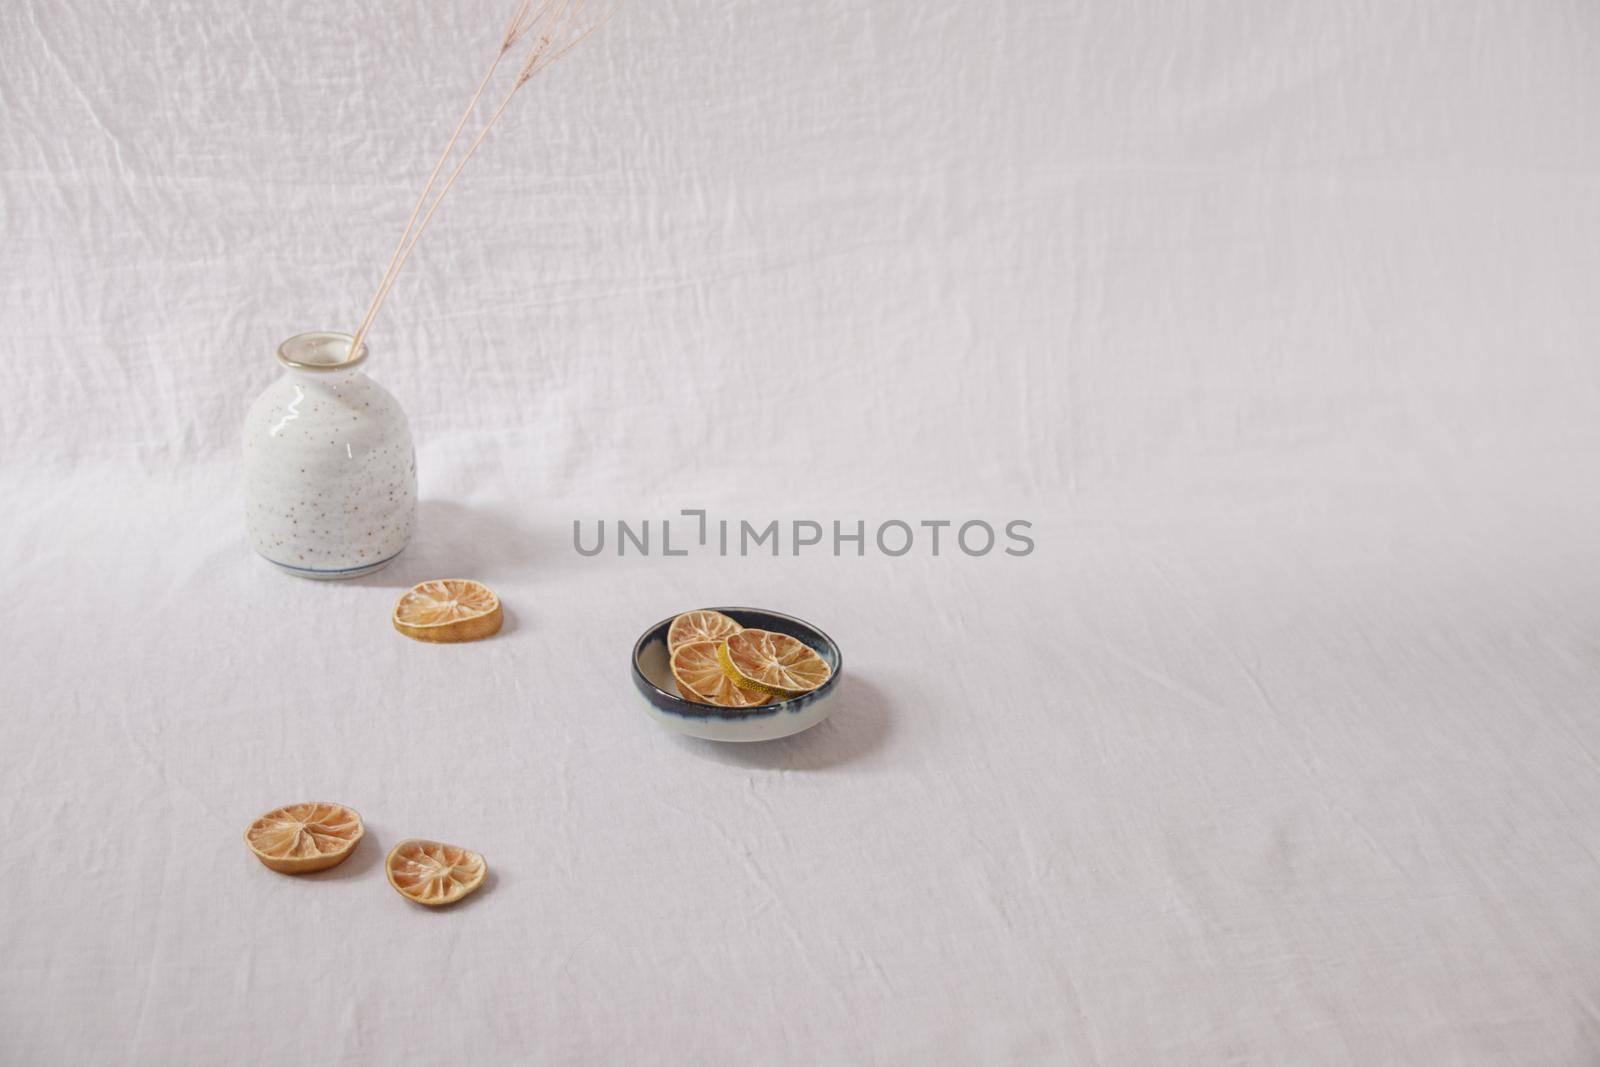 Dried lemon slices on a white delicate background showing the Spring and Summer aesthetics